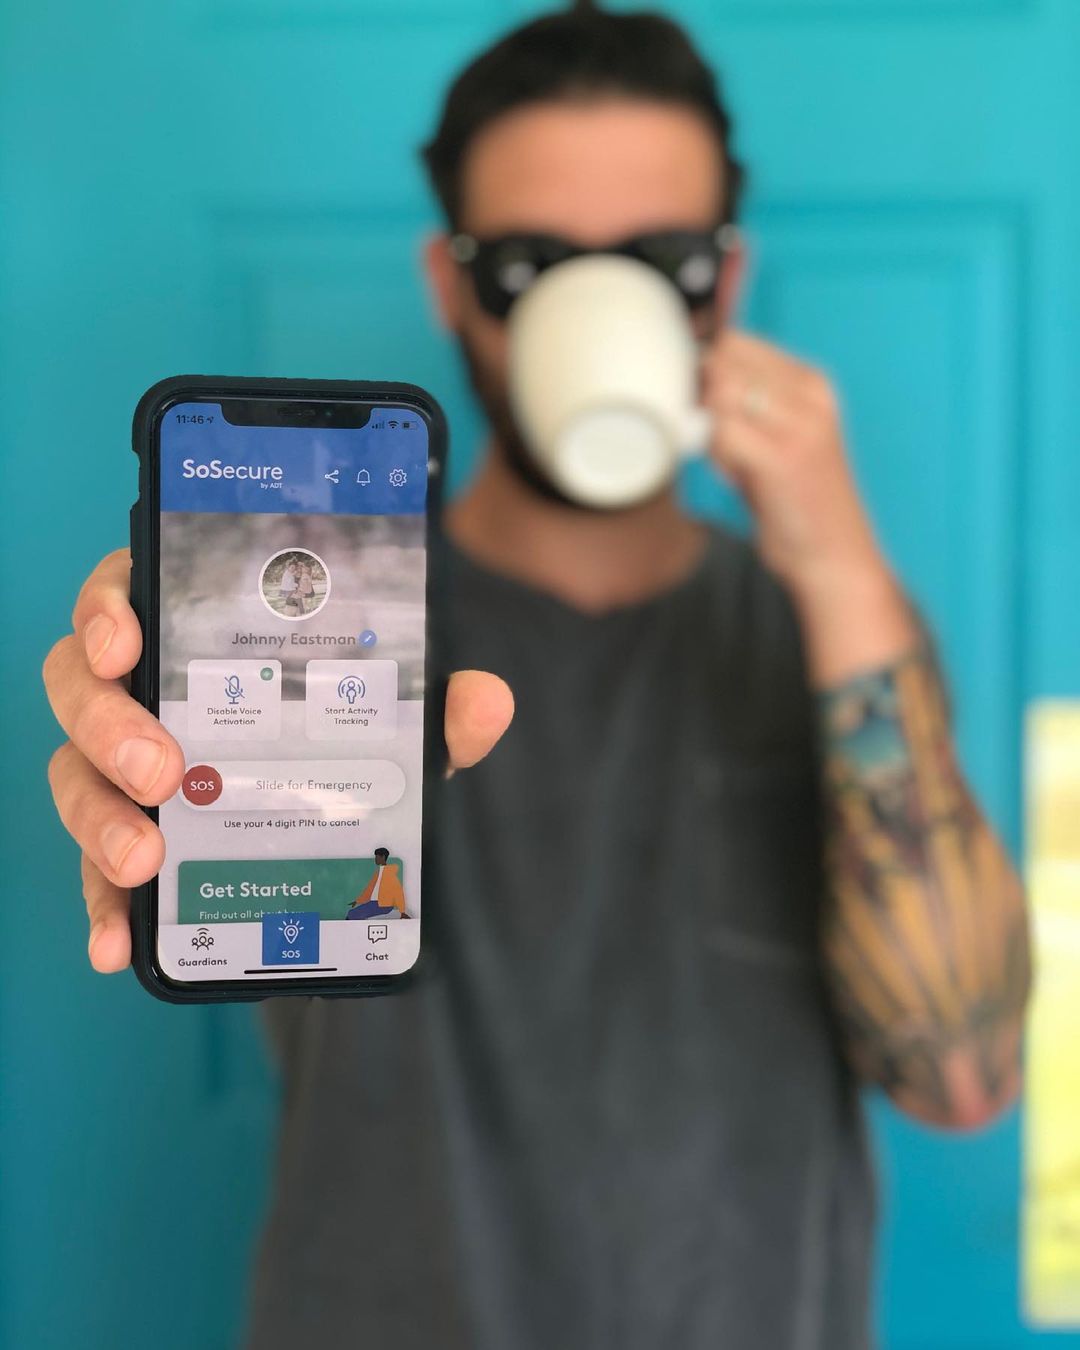 Male drinking coffee and holding up So Secure Safety App. Photo via Instagram user @thetattooedhusband